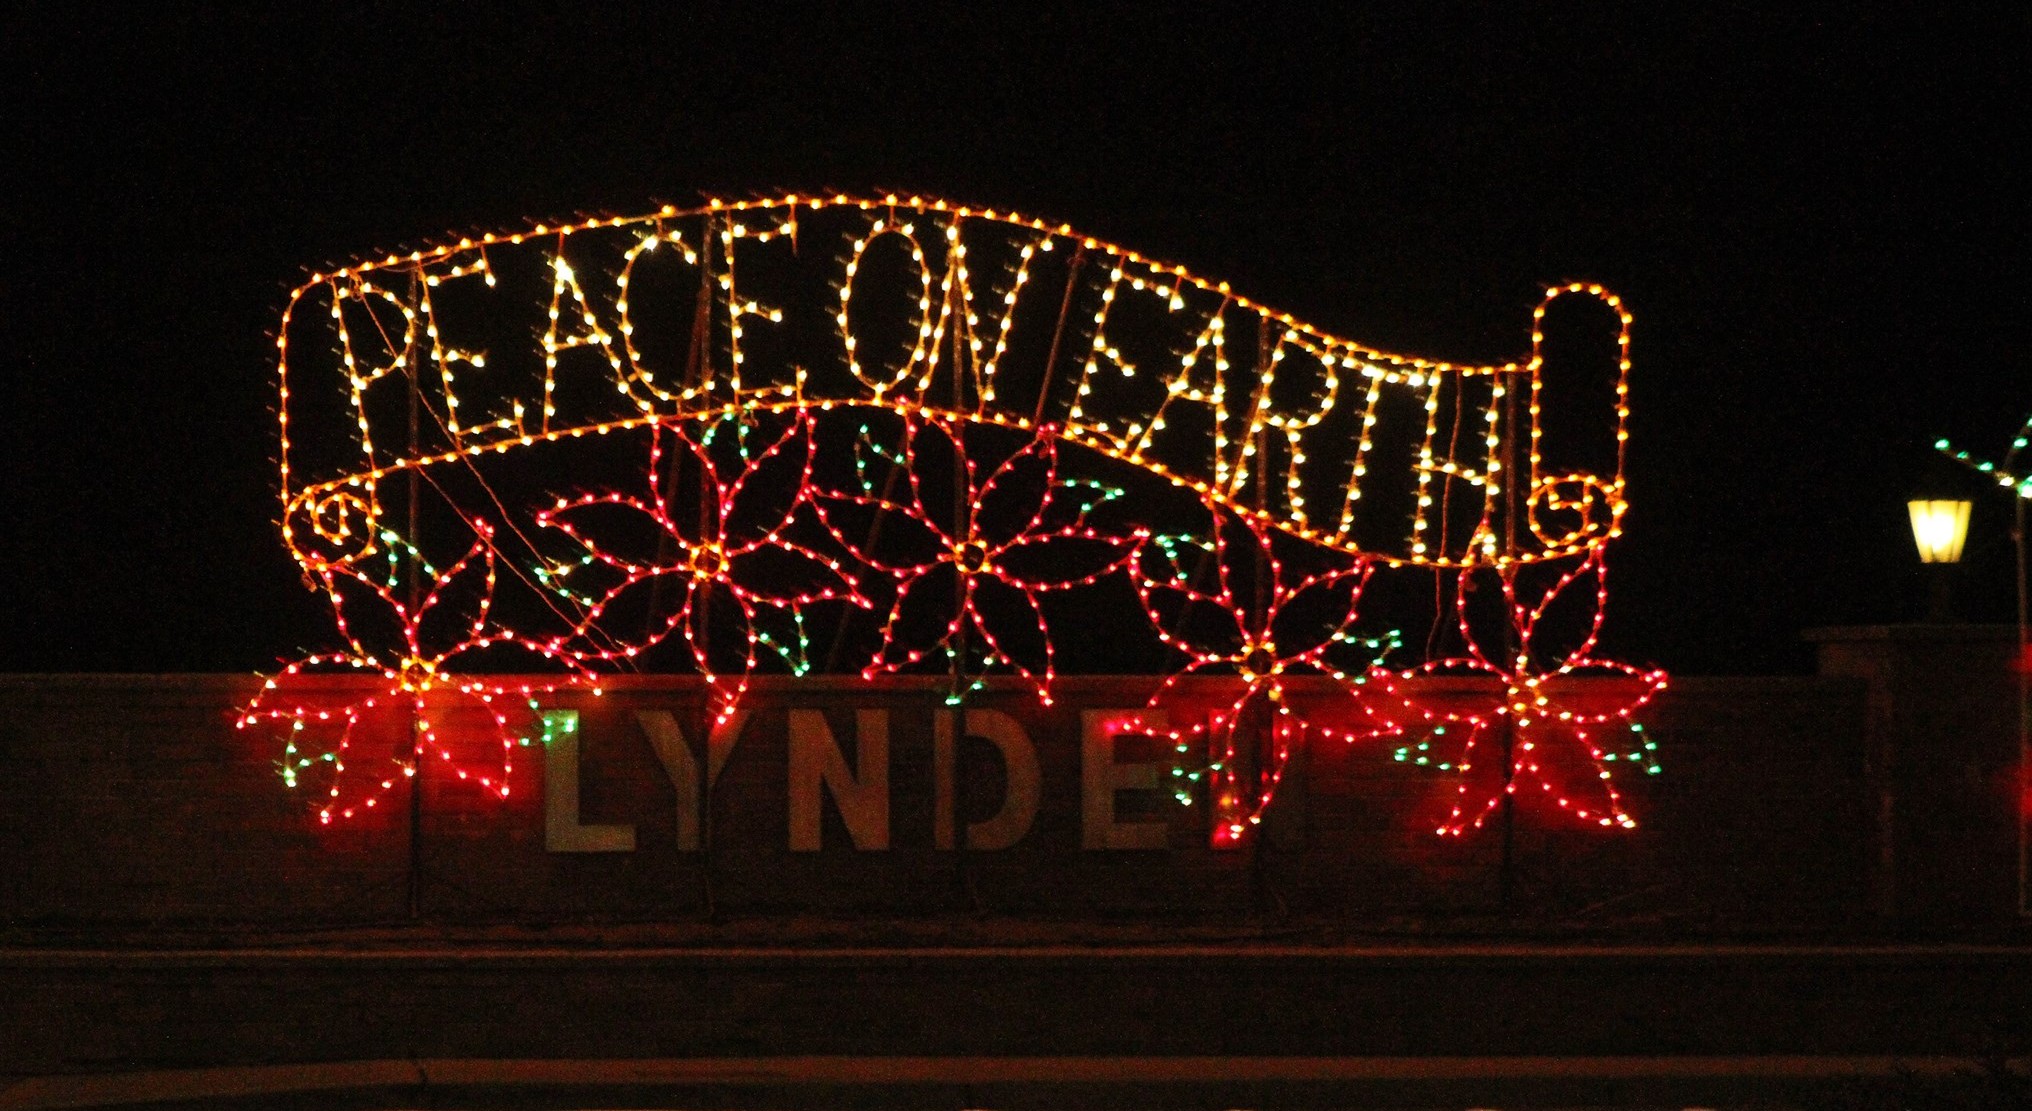 Lynden in Lights 2015: what’s on this weekend?